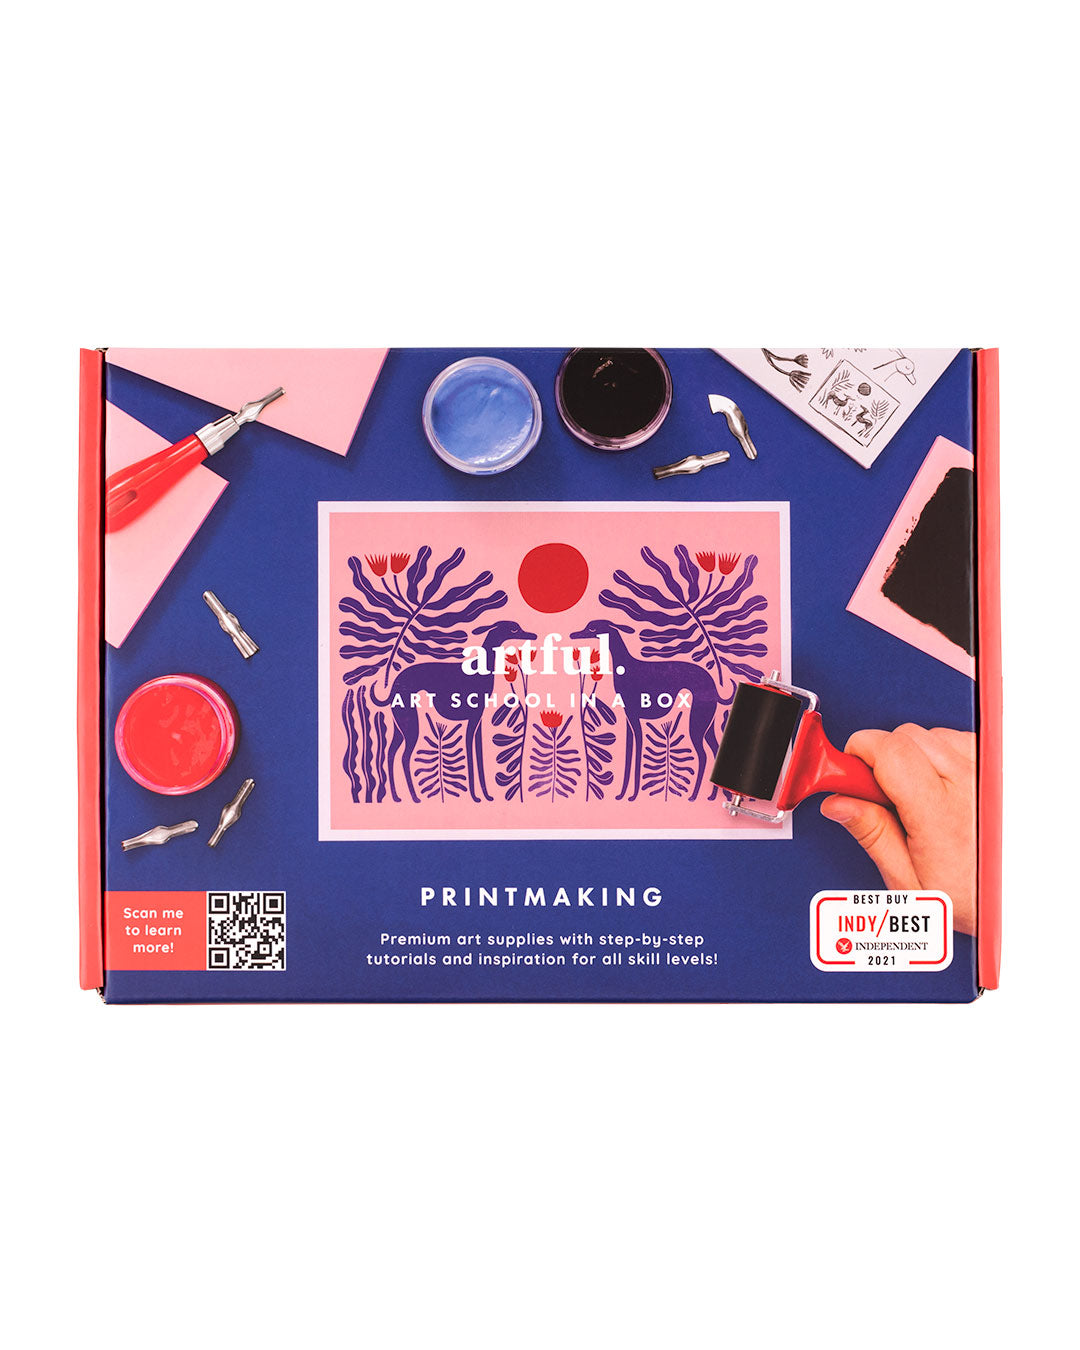 Artful: Art School in a Box - Print Making Edition Front Cover